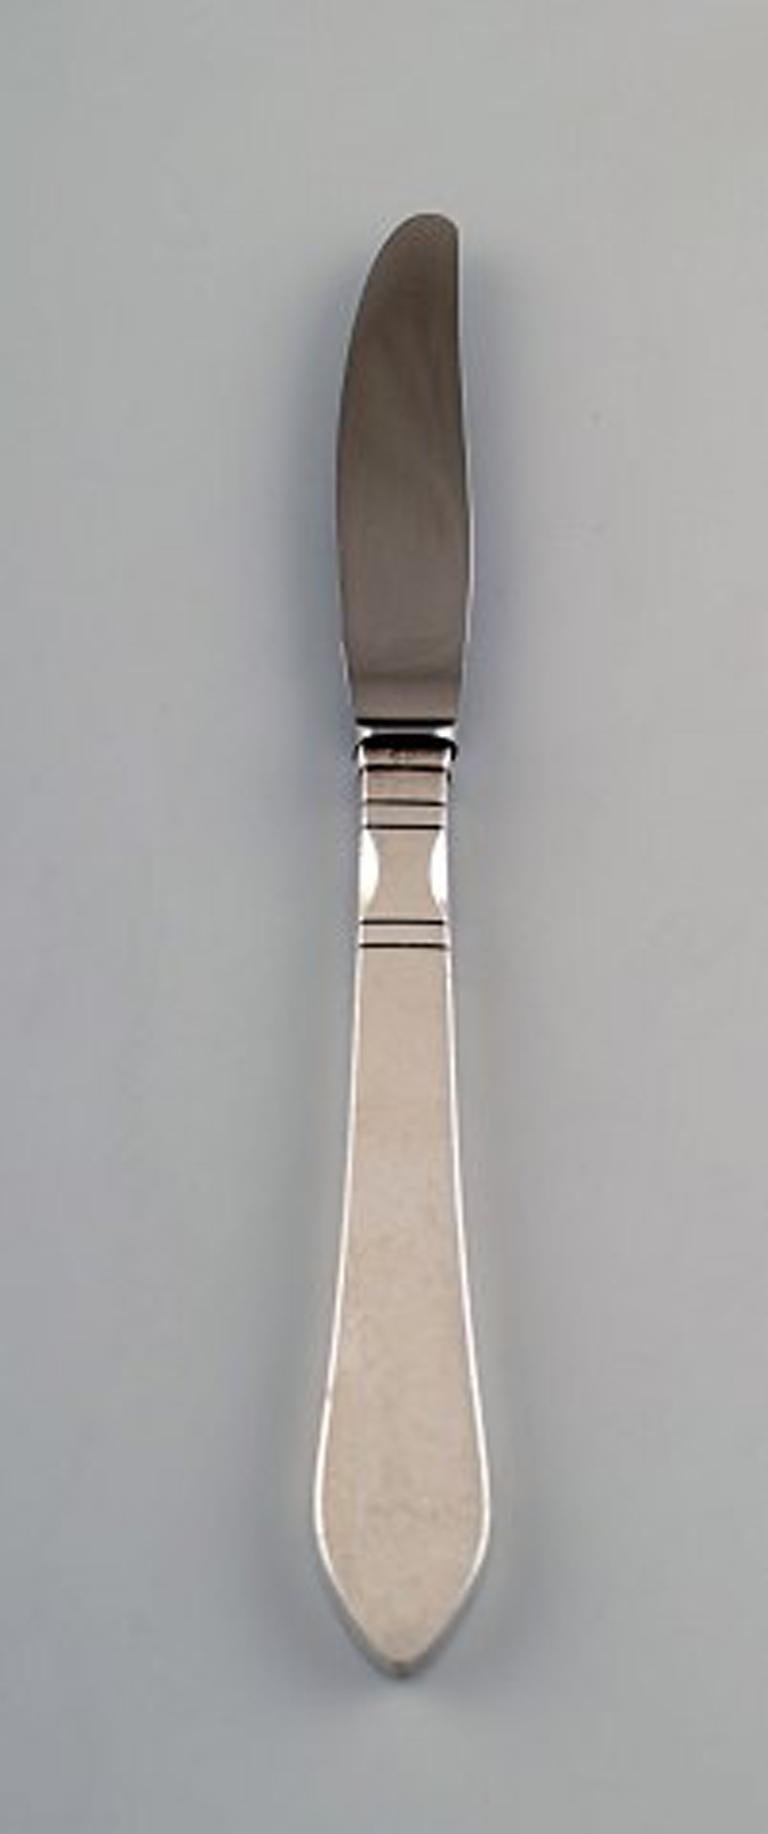 Georg Jensen. Continental, two dinner knife, silverware, hand-hammered.
The cutlery is designed by Georg Jensen in 1906.
In perfect condition.
Measures: 21 cm.